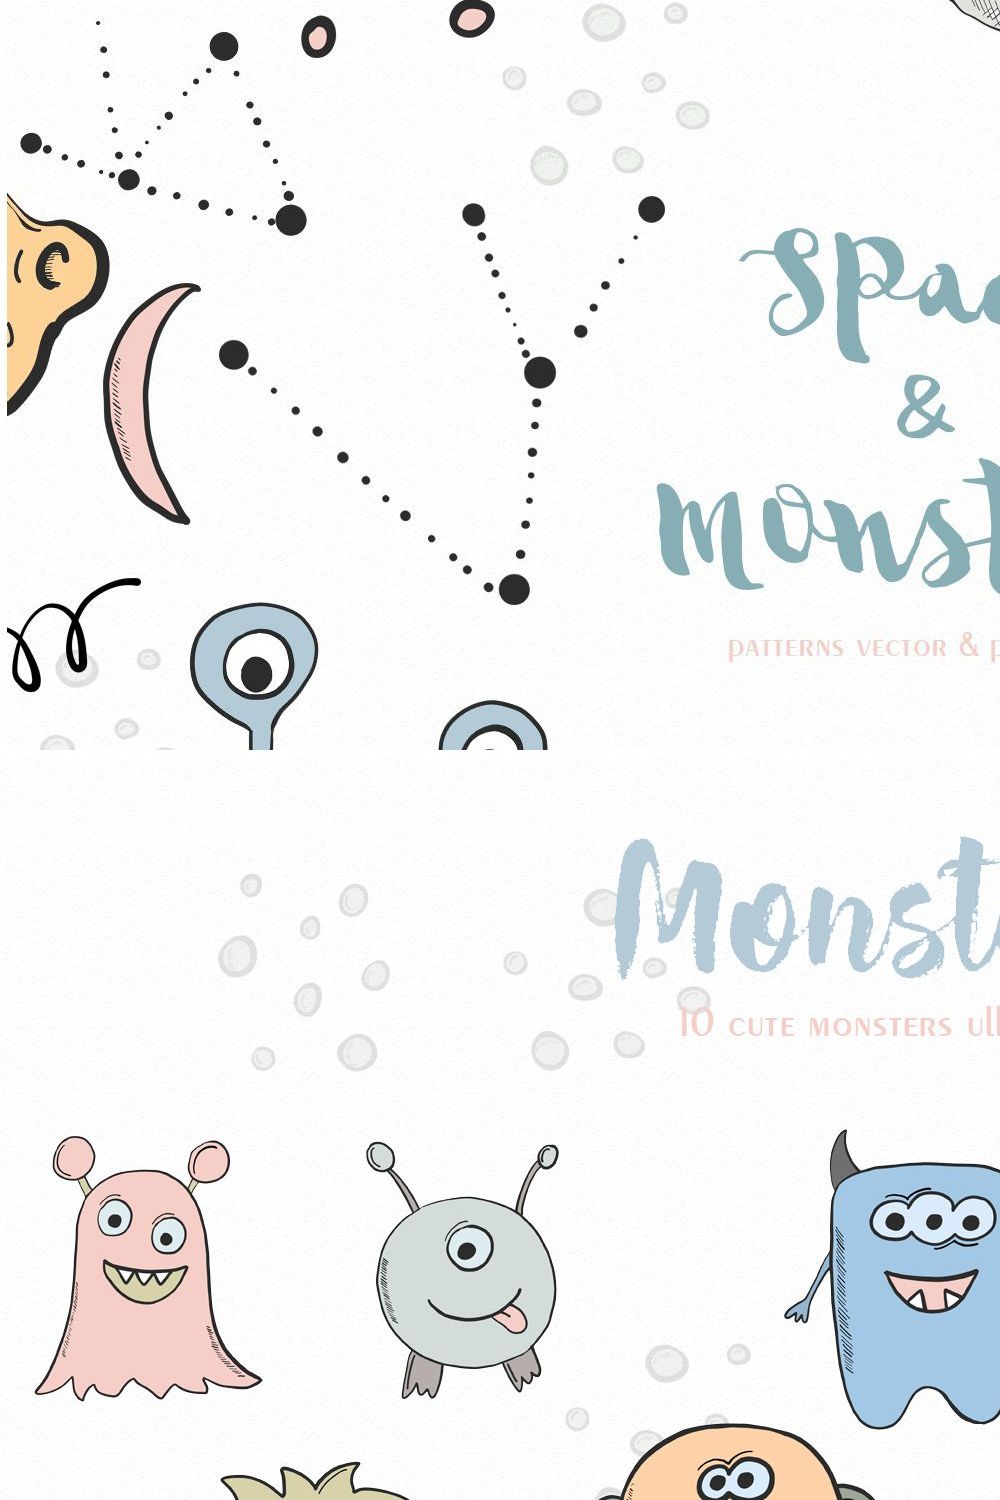 Spase & monsters clipart pinterest preview image.